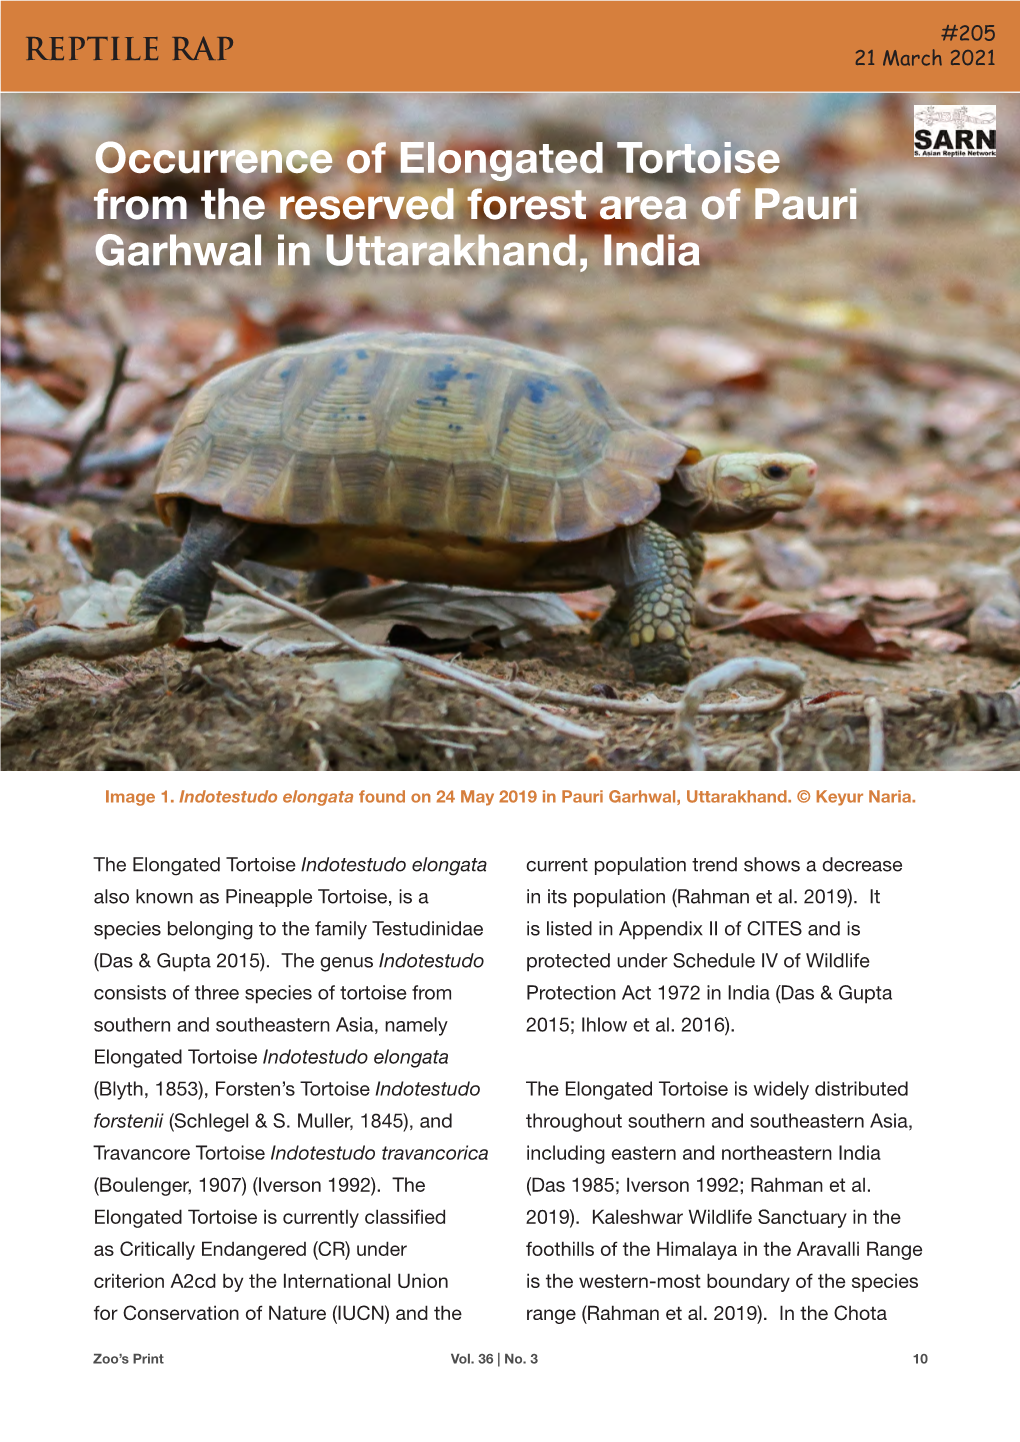 Occurrence of Elongated Tortoise from the Reserved Forest Area of Pauri Garhwal in Uttarakhand, India